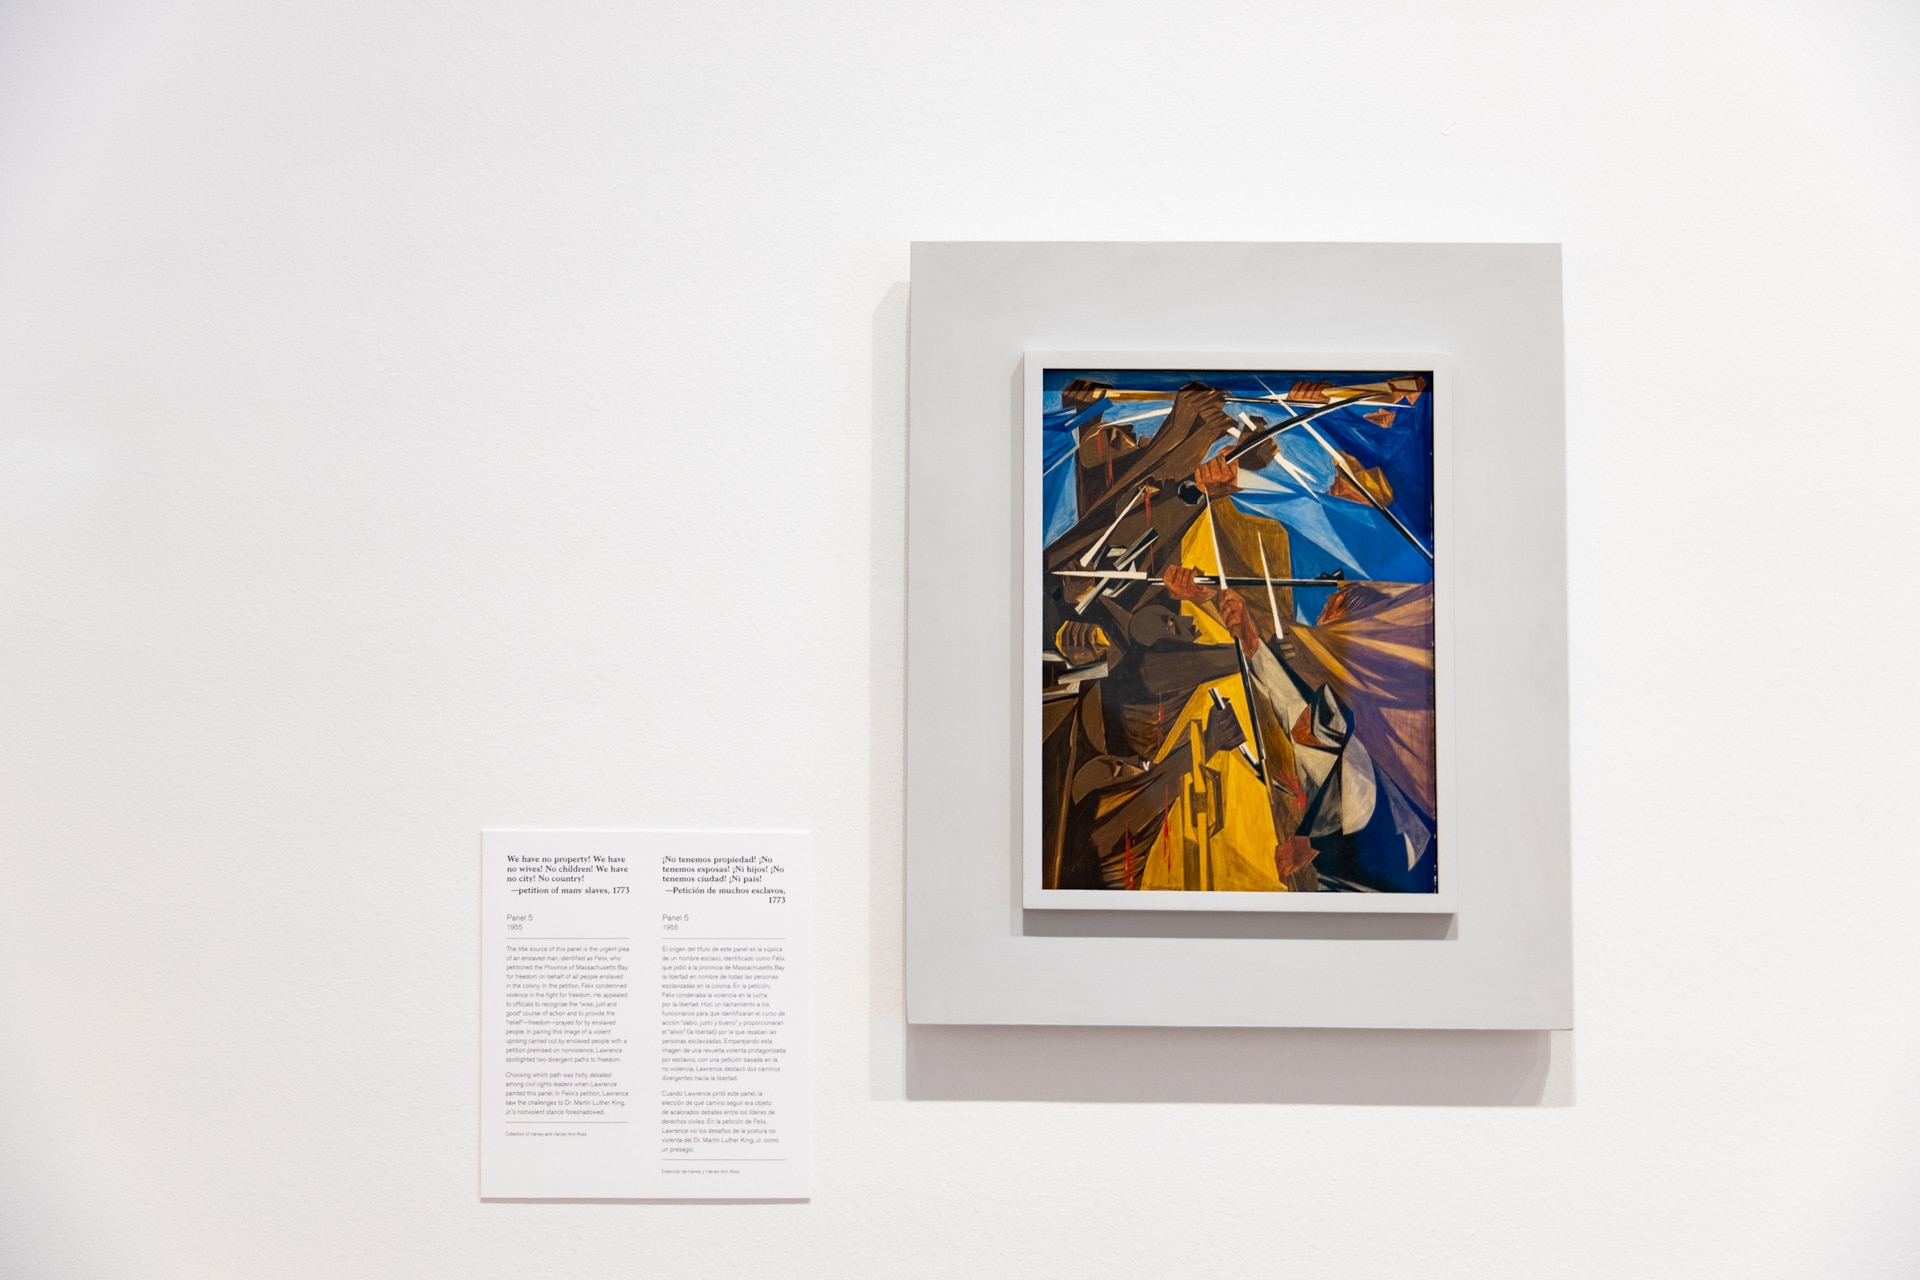 BMA Jacob Lawrence 5 1 "Jacob Lawrence: The American Struggle" retells history at the Birmingham Museum of Art